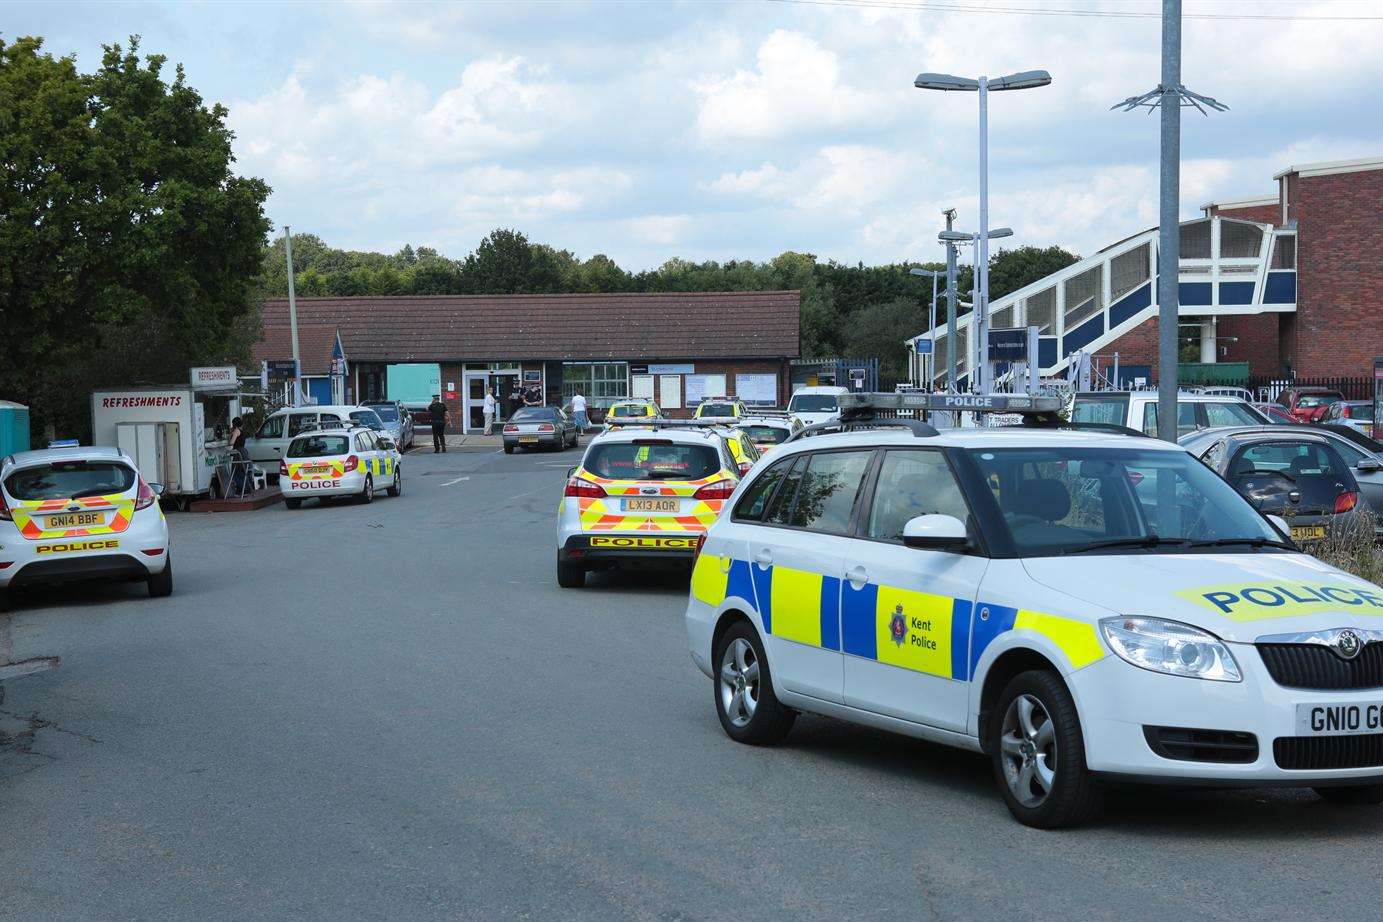 Staplehurst station was cordoned off while police investigated